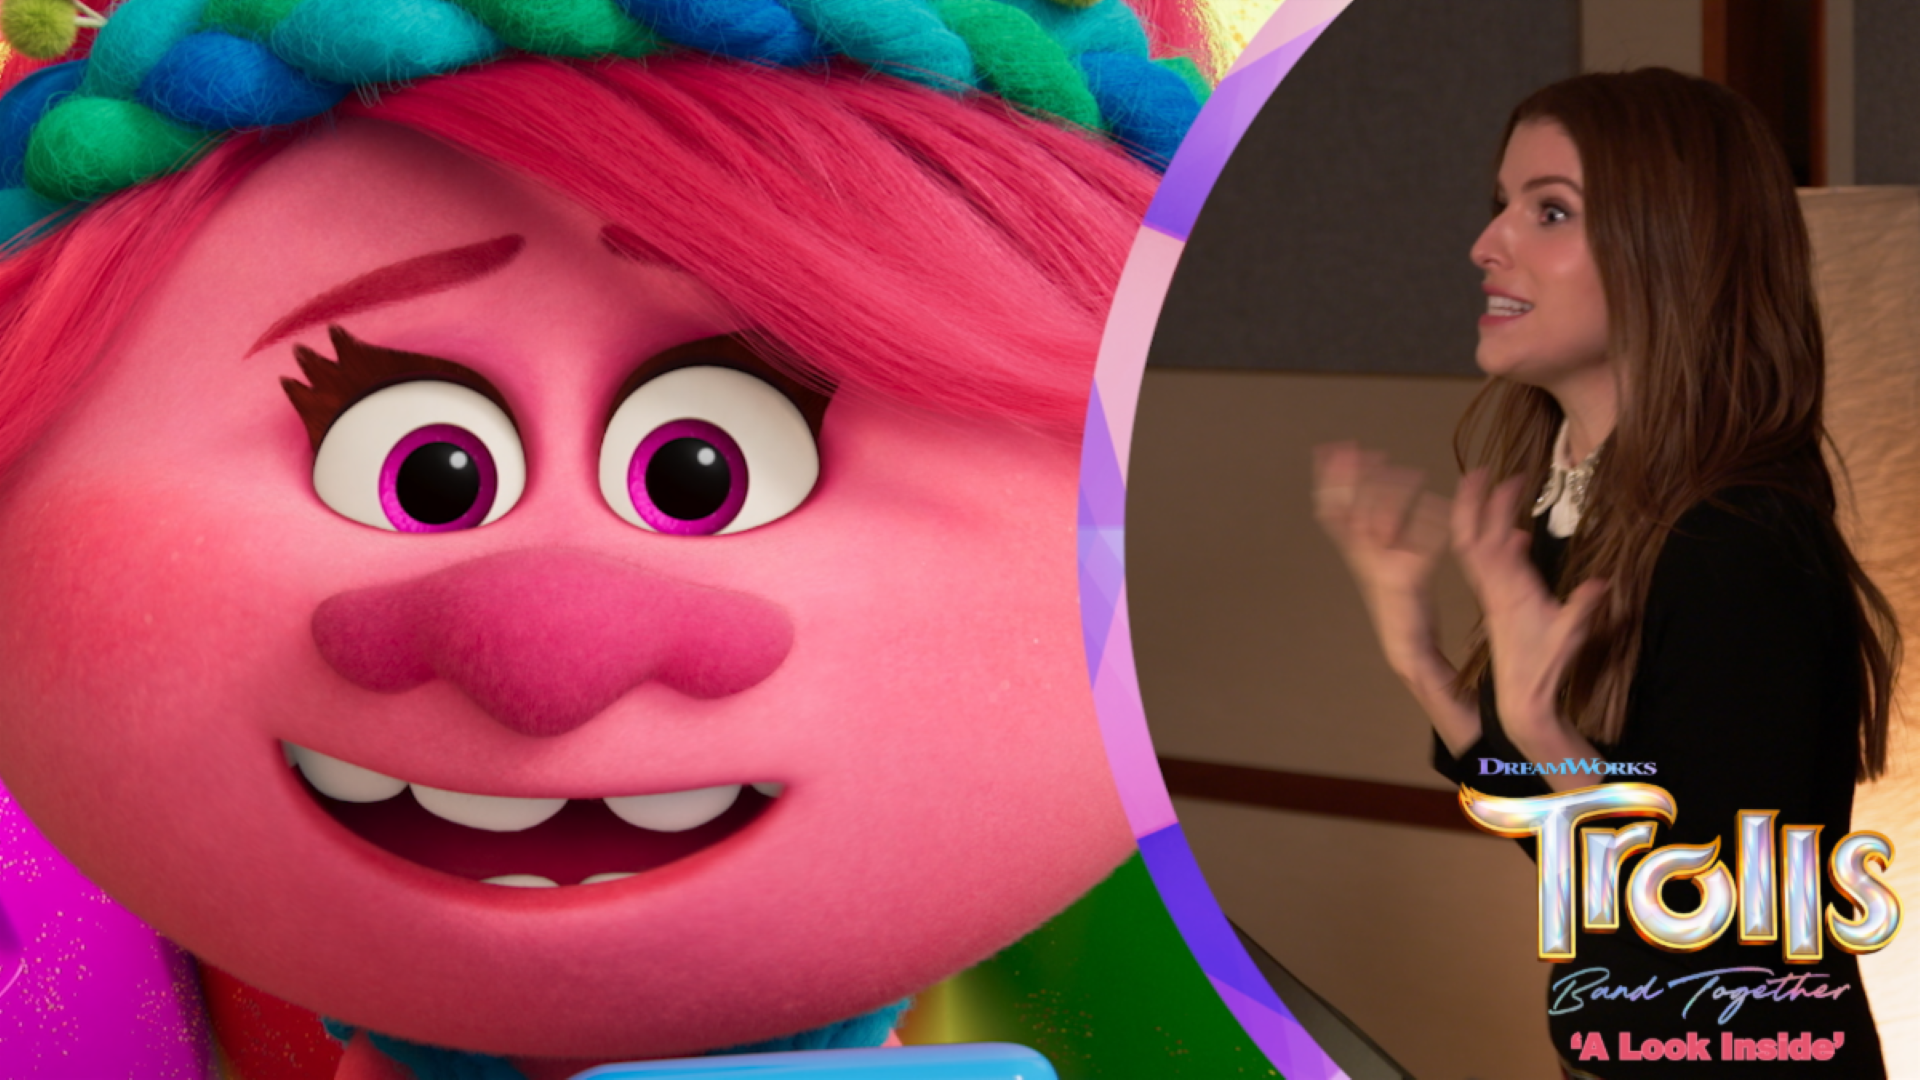 TROLLS BAND TOGETHER Drops A Behind The Scenes Look At The Upcoming Vibrant Cinematic Joy Bomb